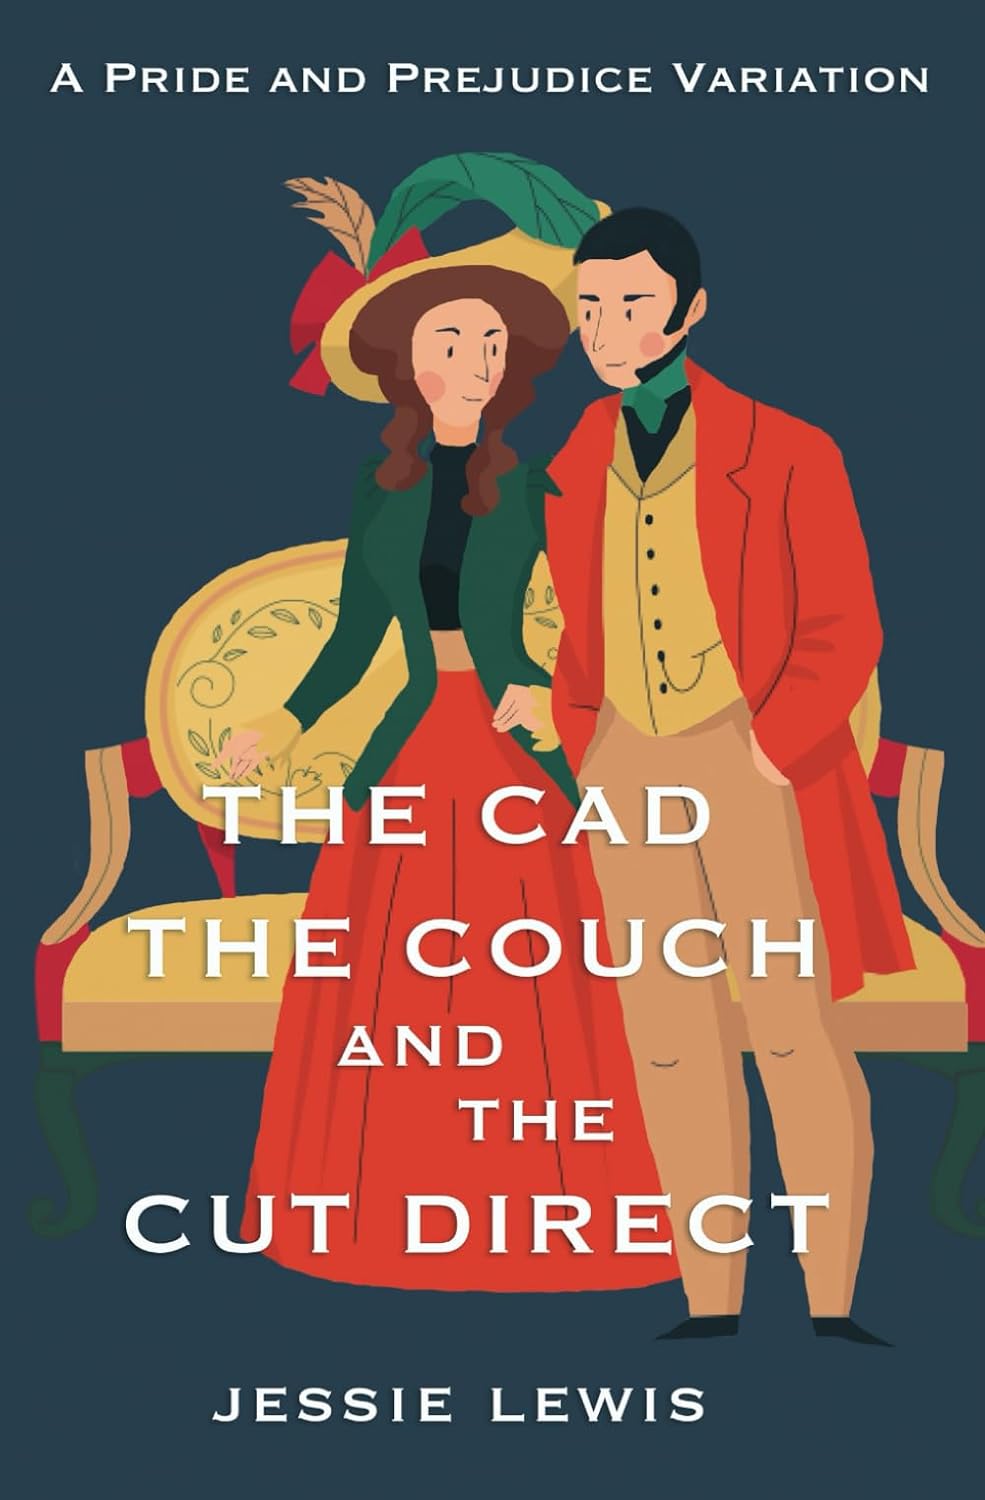 The Cad, the Couch and the Cut Direct by Jessie Lewis